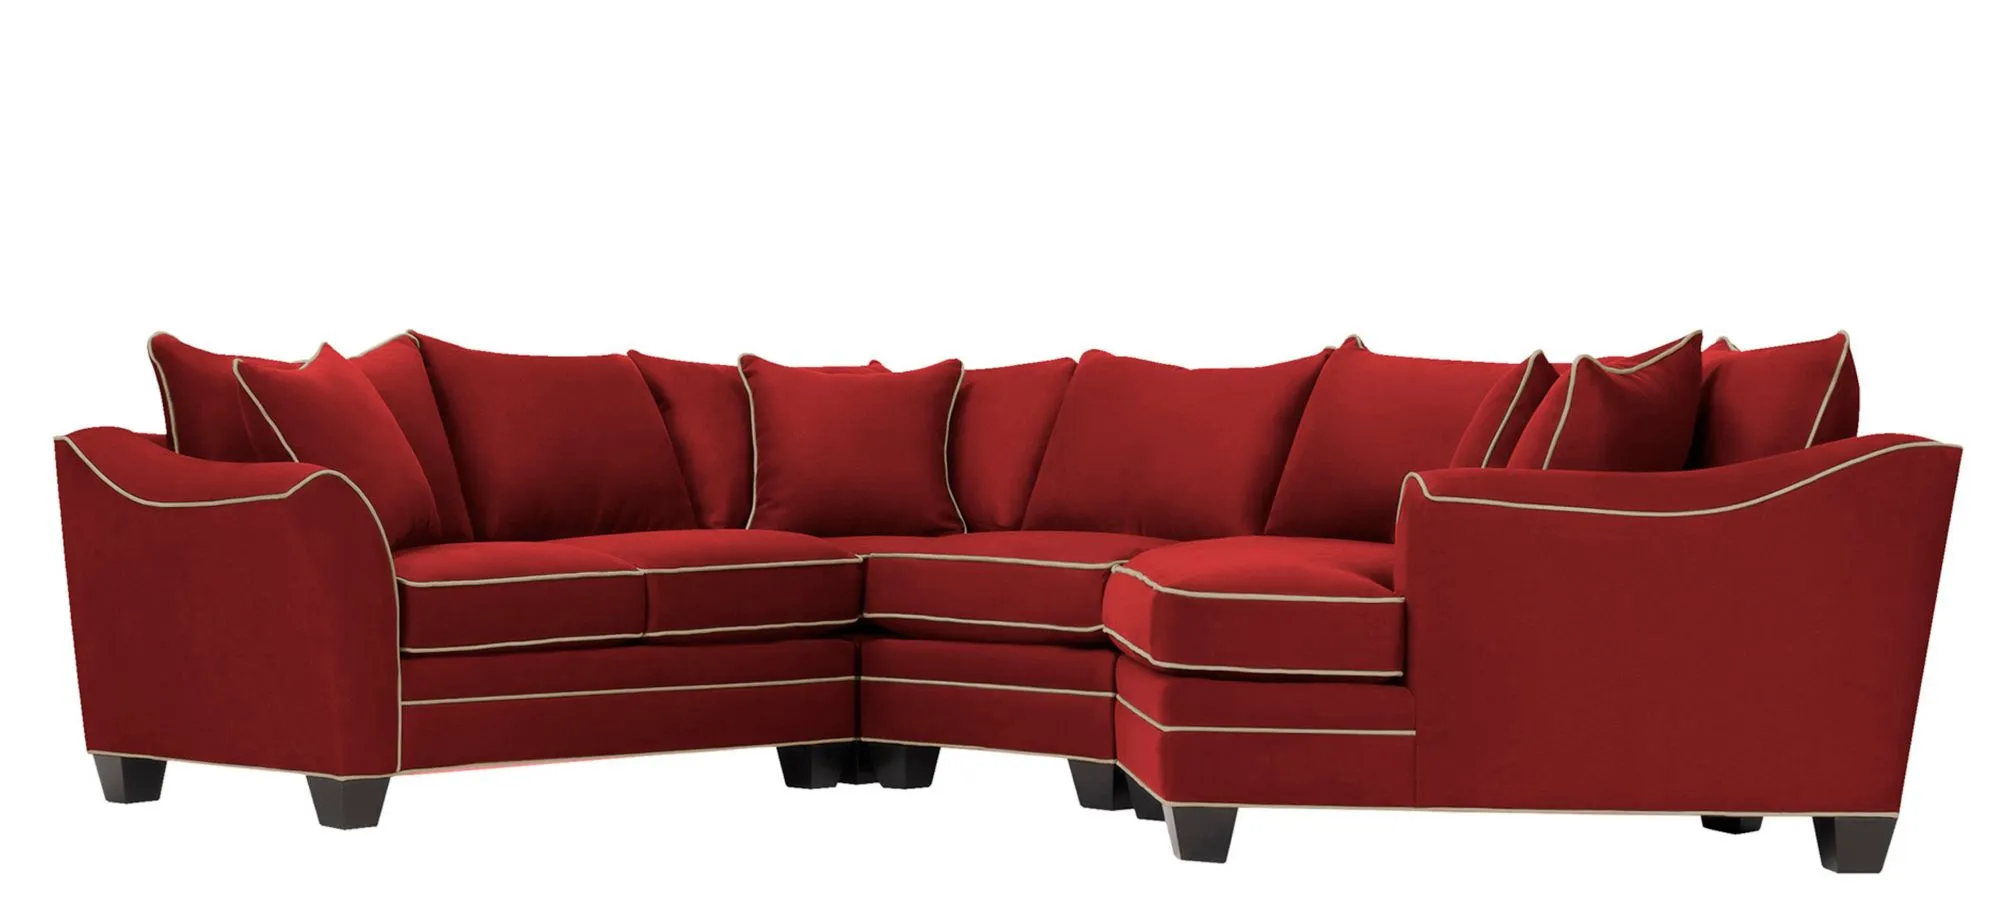 Foresthill 4-pc. Right Hand Cuddler Sectional Sofa in Suede So Soft Cardinal/Mineral by H.M. Richards